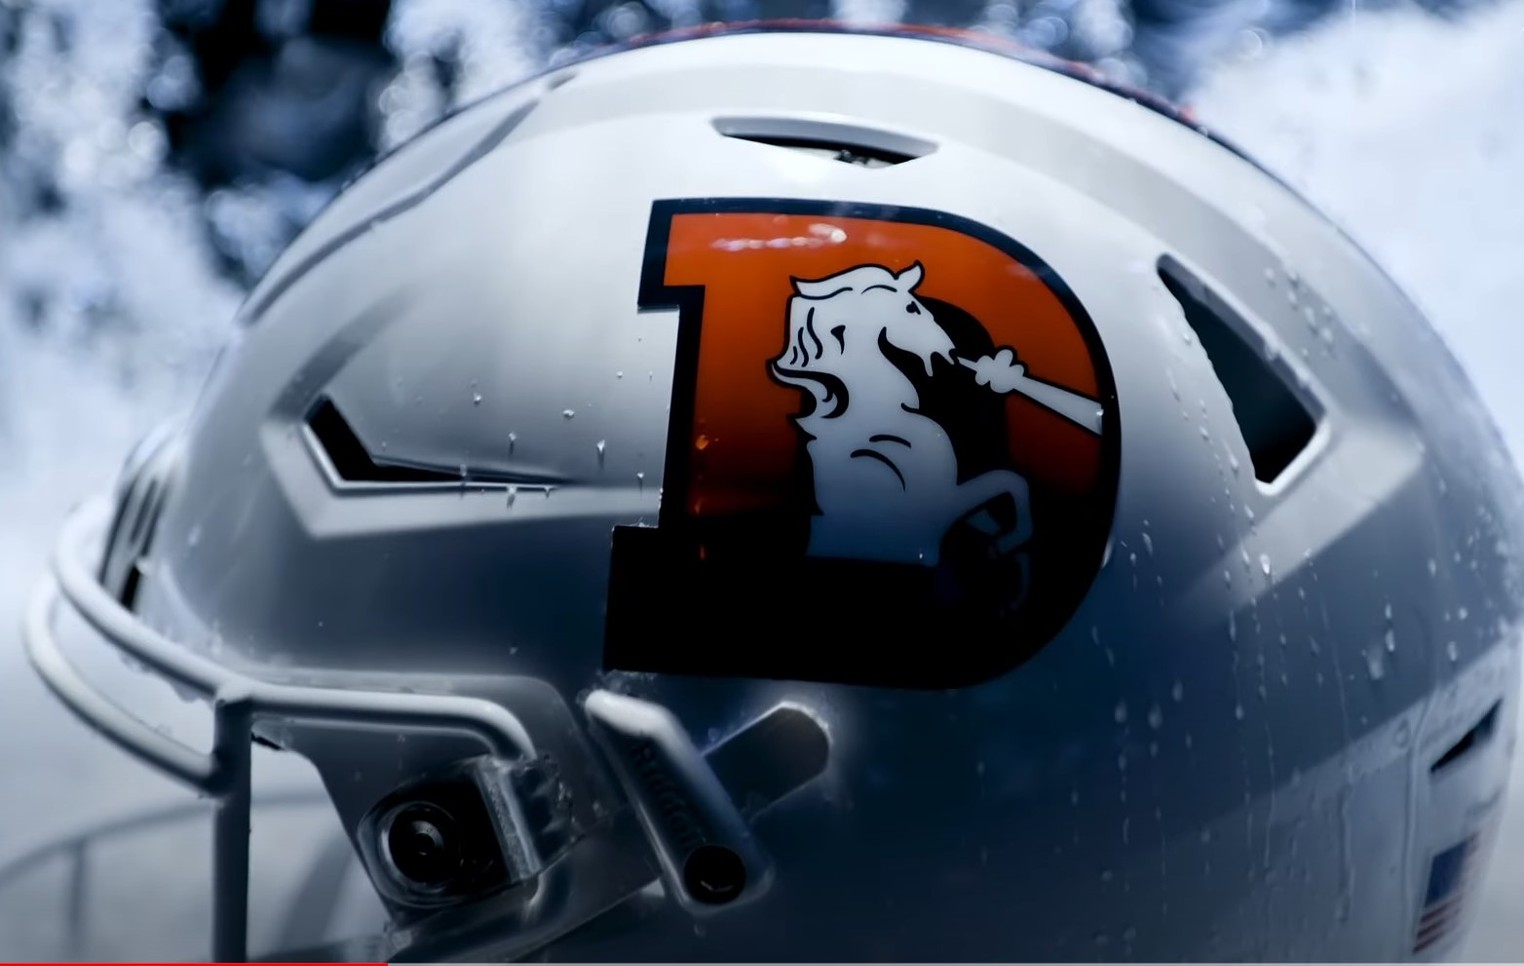 Denver Broncos: This fan-made throwback uniform is amazing